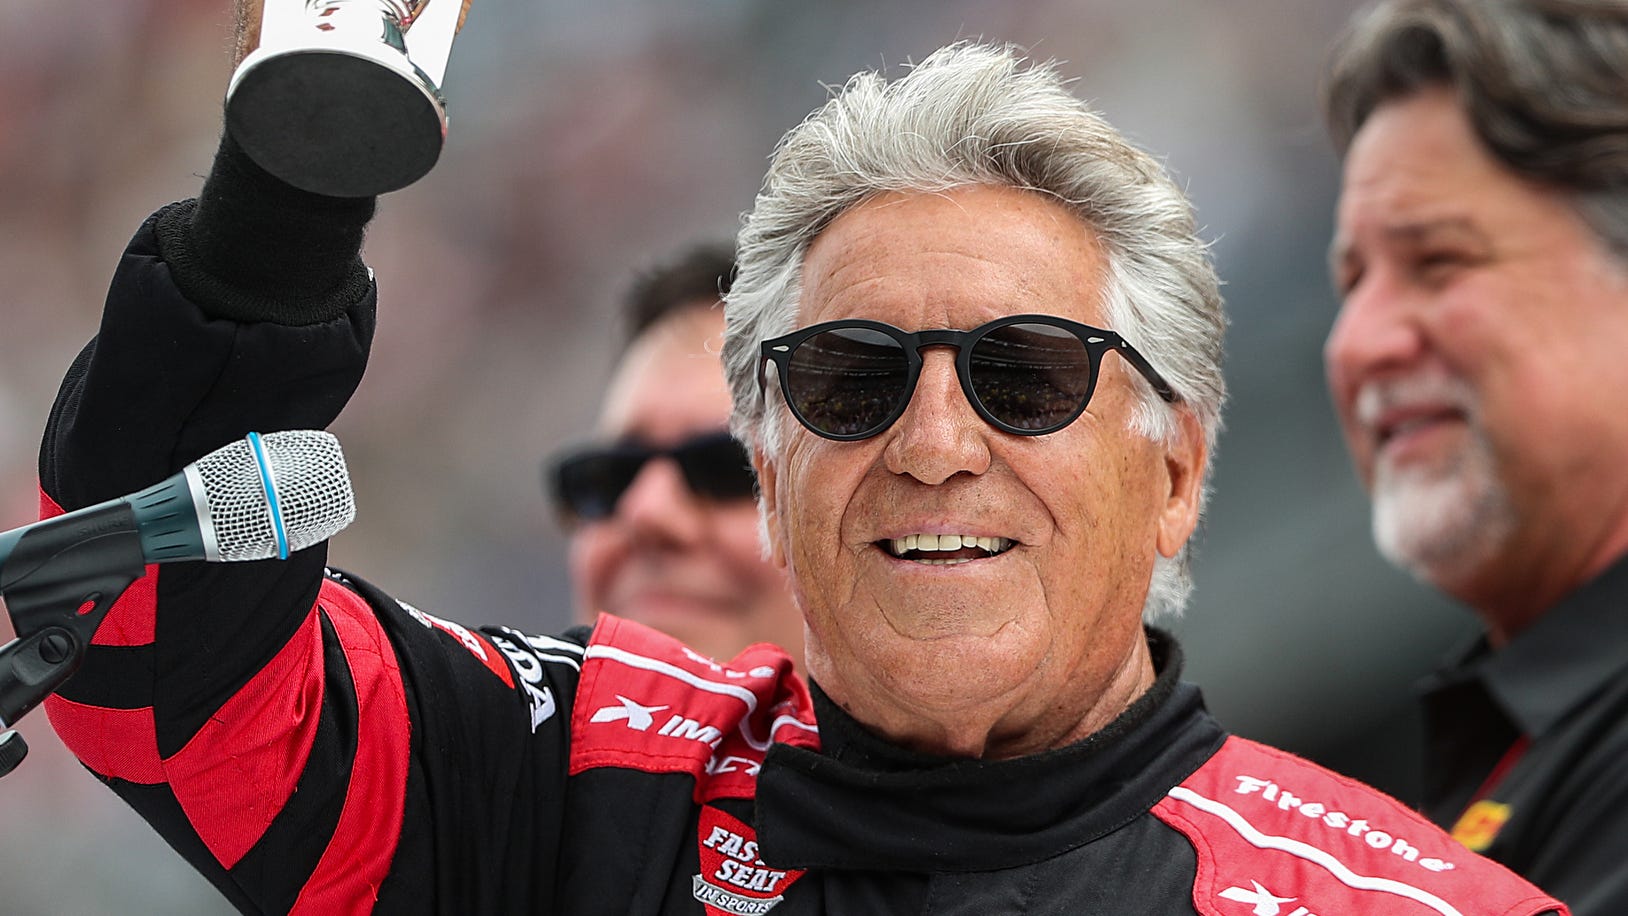 Mario Andretti flashes guitar skills in country music cameo